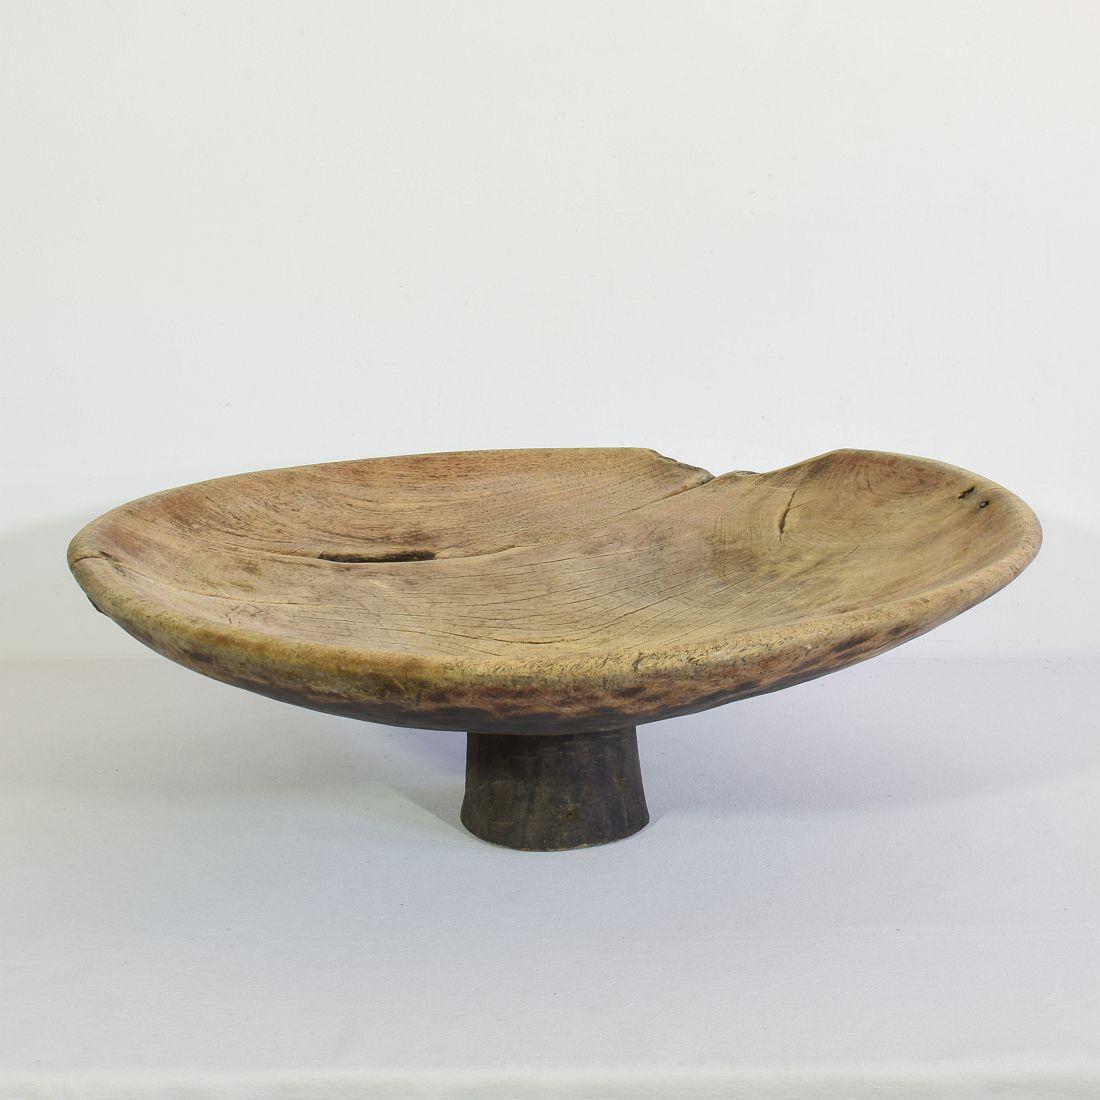 Hand-Crafted 18th-19th Century Moroccan Wooden Couscous / Bread Bowl